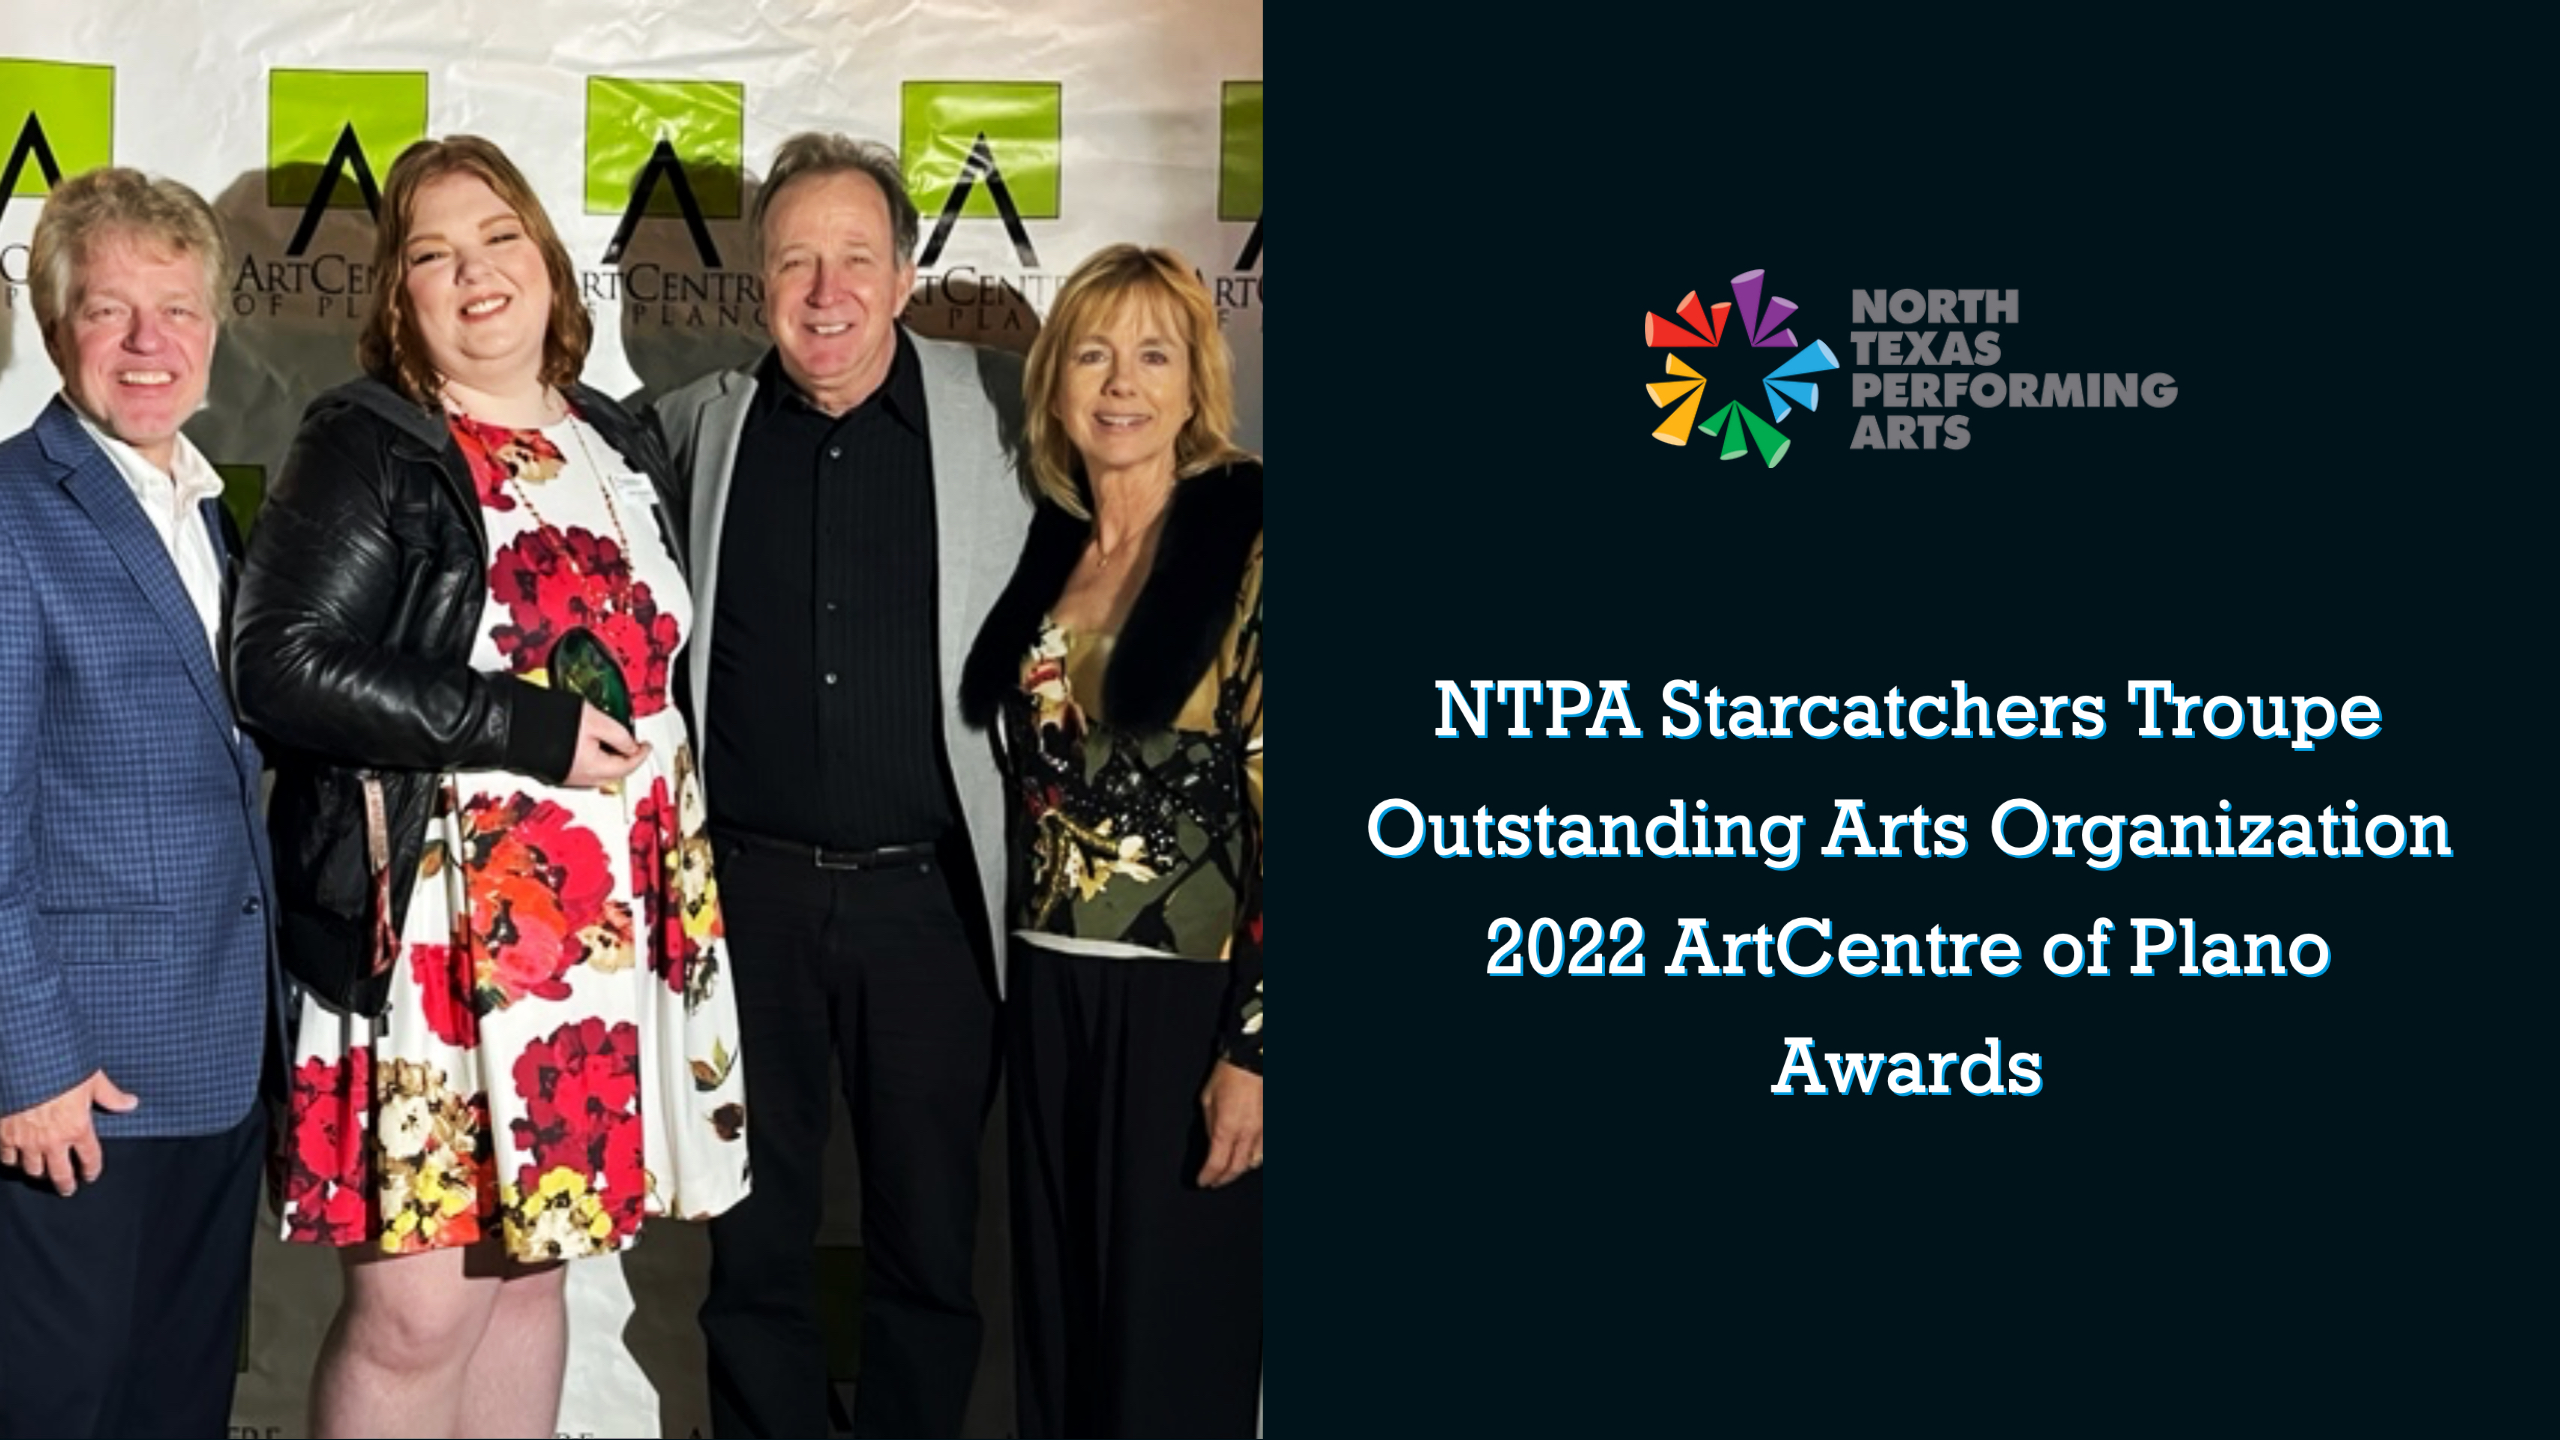 NTPA Starcatchers Troupe for being honored as “Outstanding Arts Organization” from the ArtCentre of Plano